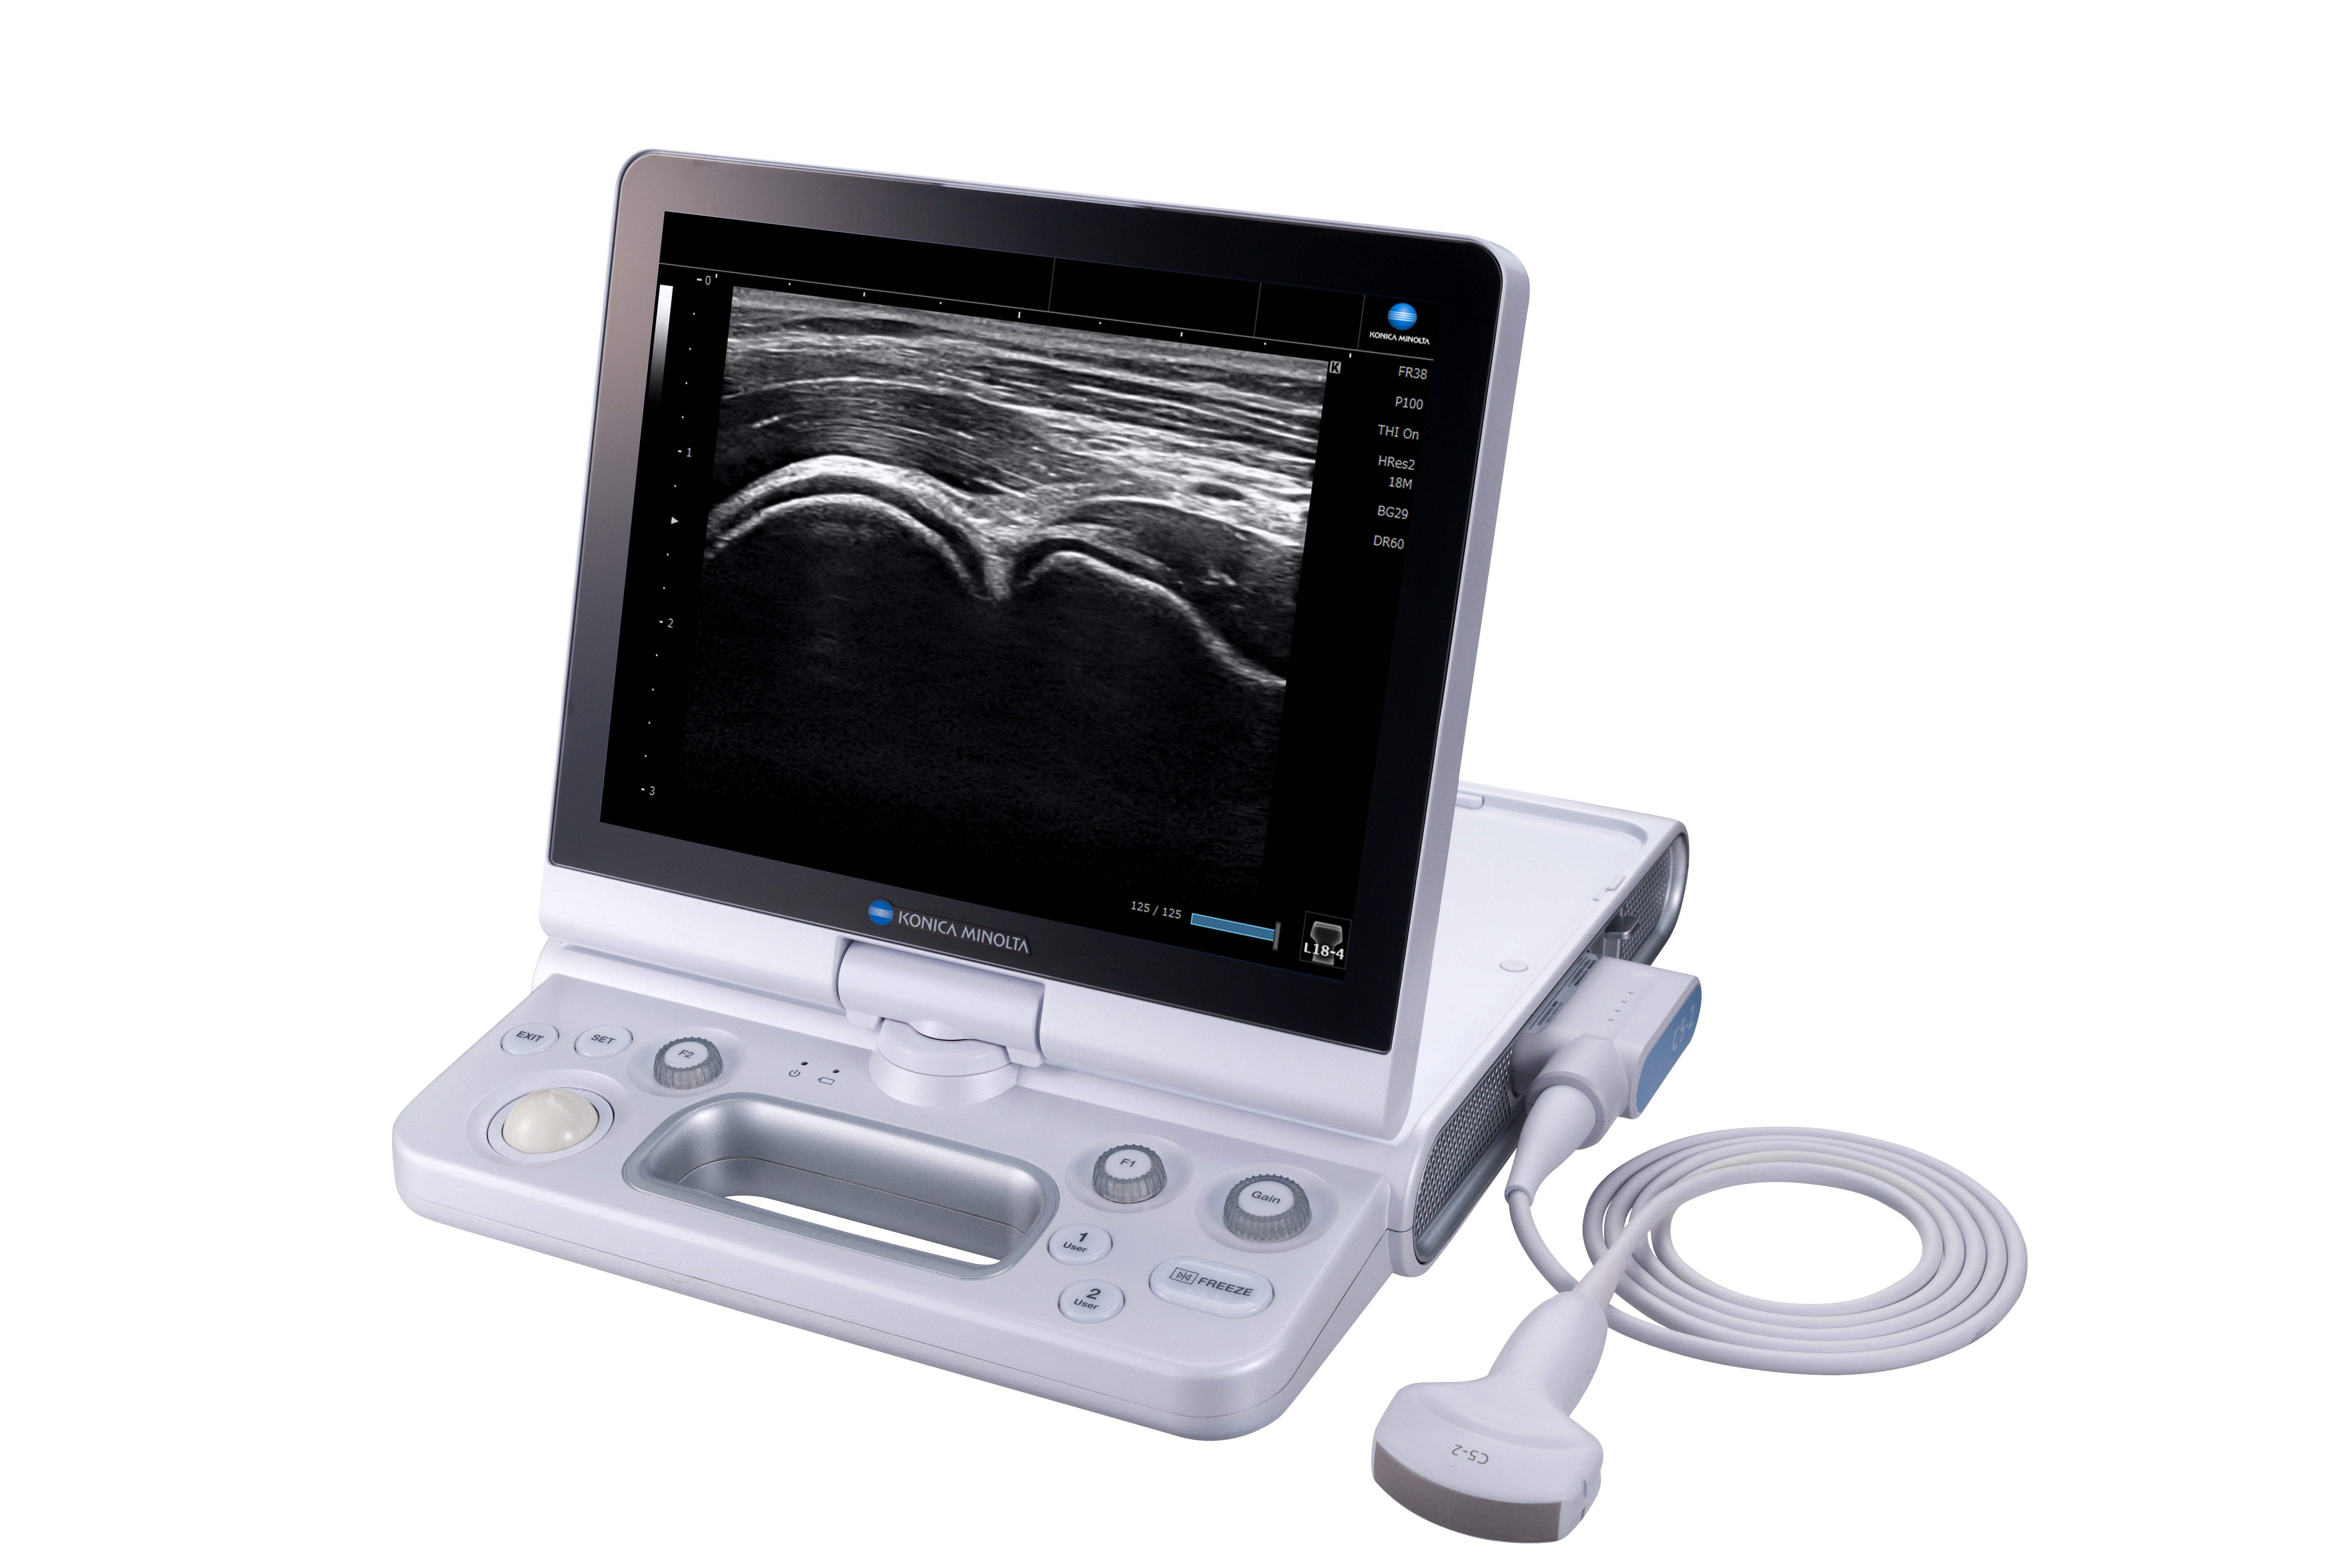 The new SONIMAGE® HS2 Compact Ultrasound System from Konica Minolta Healthcare.